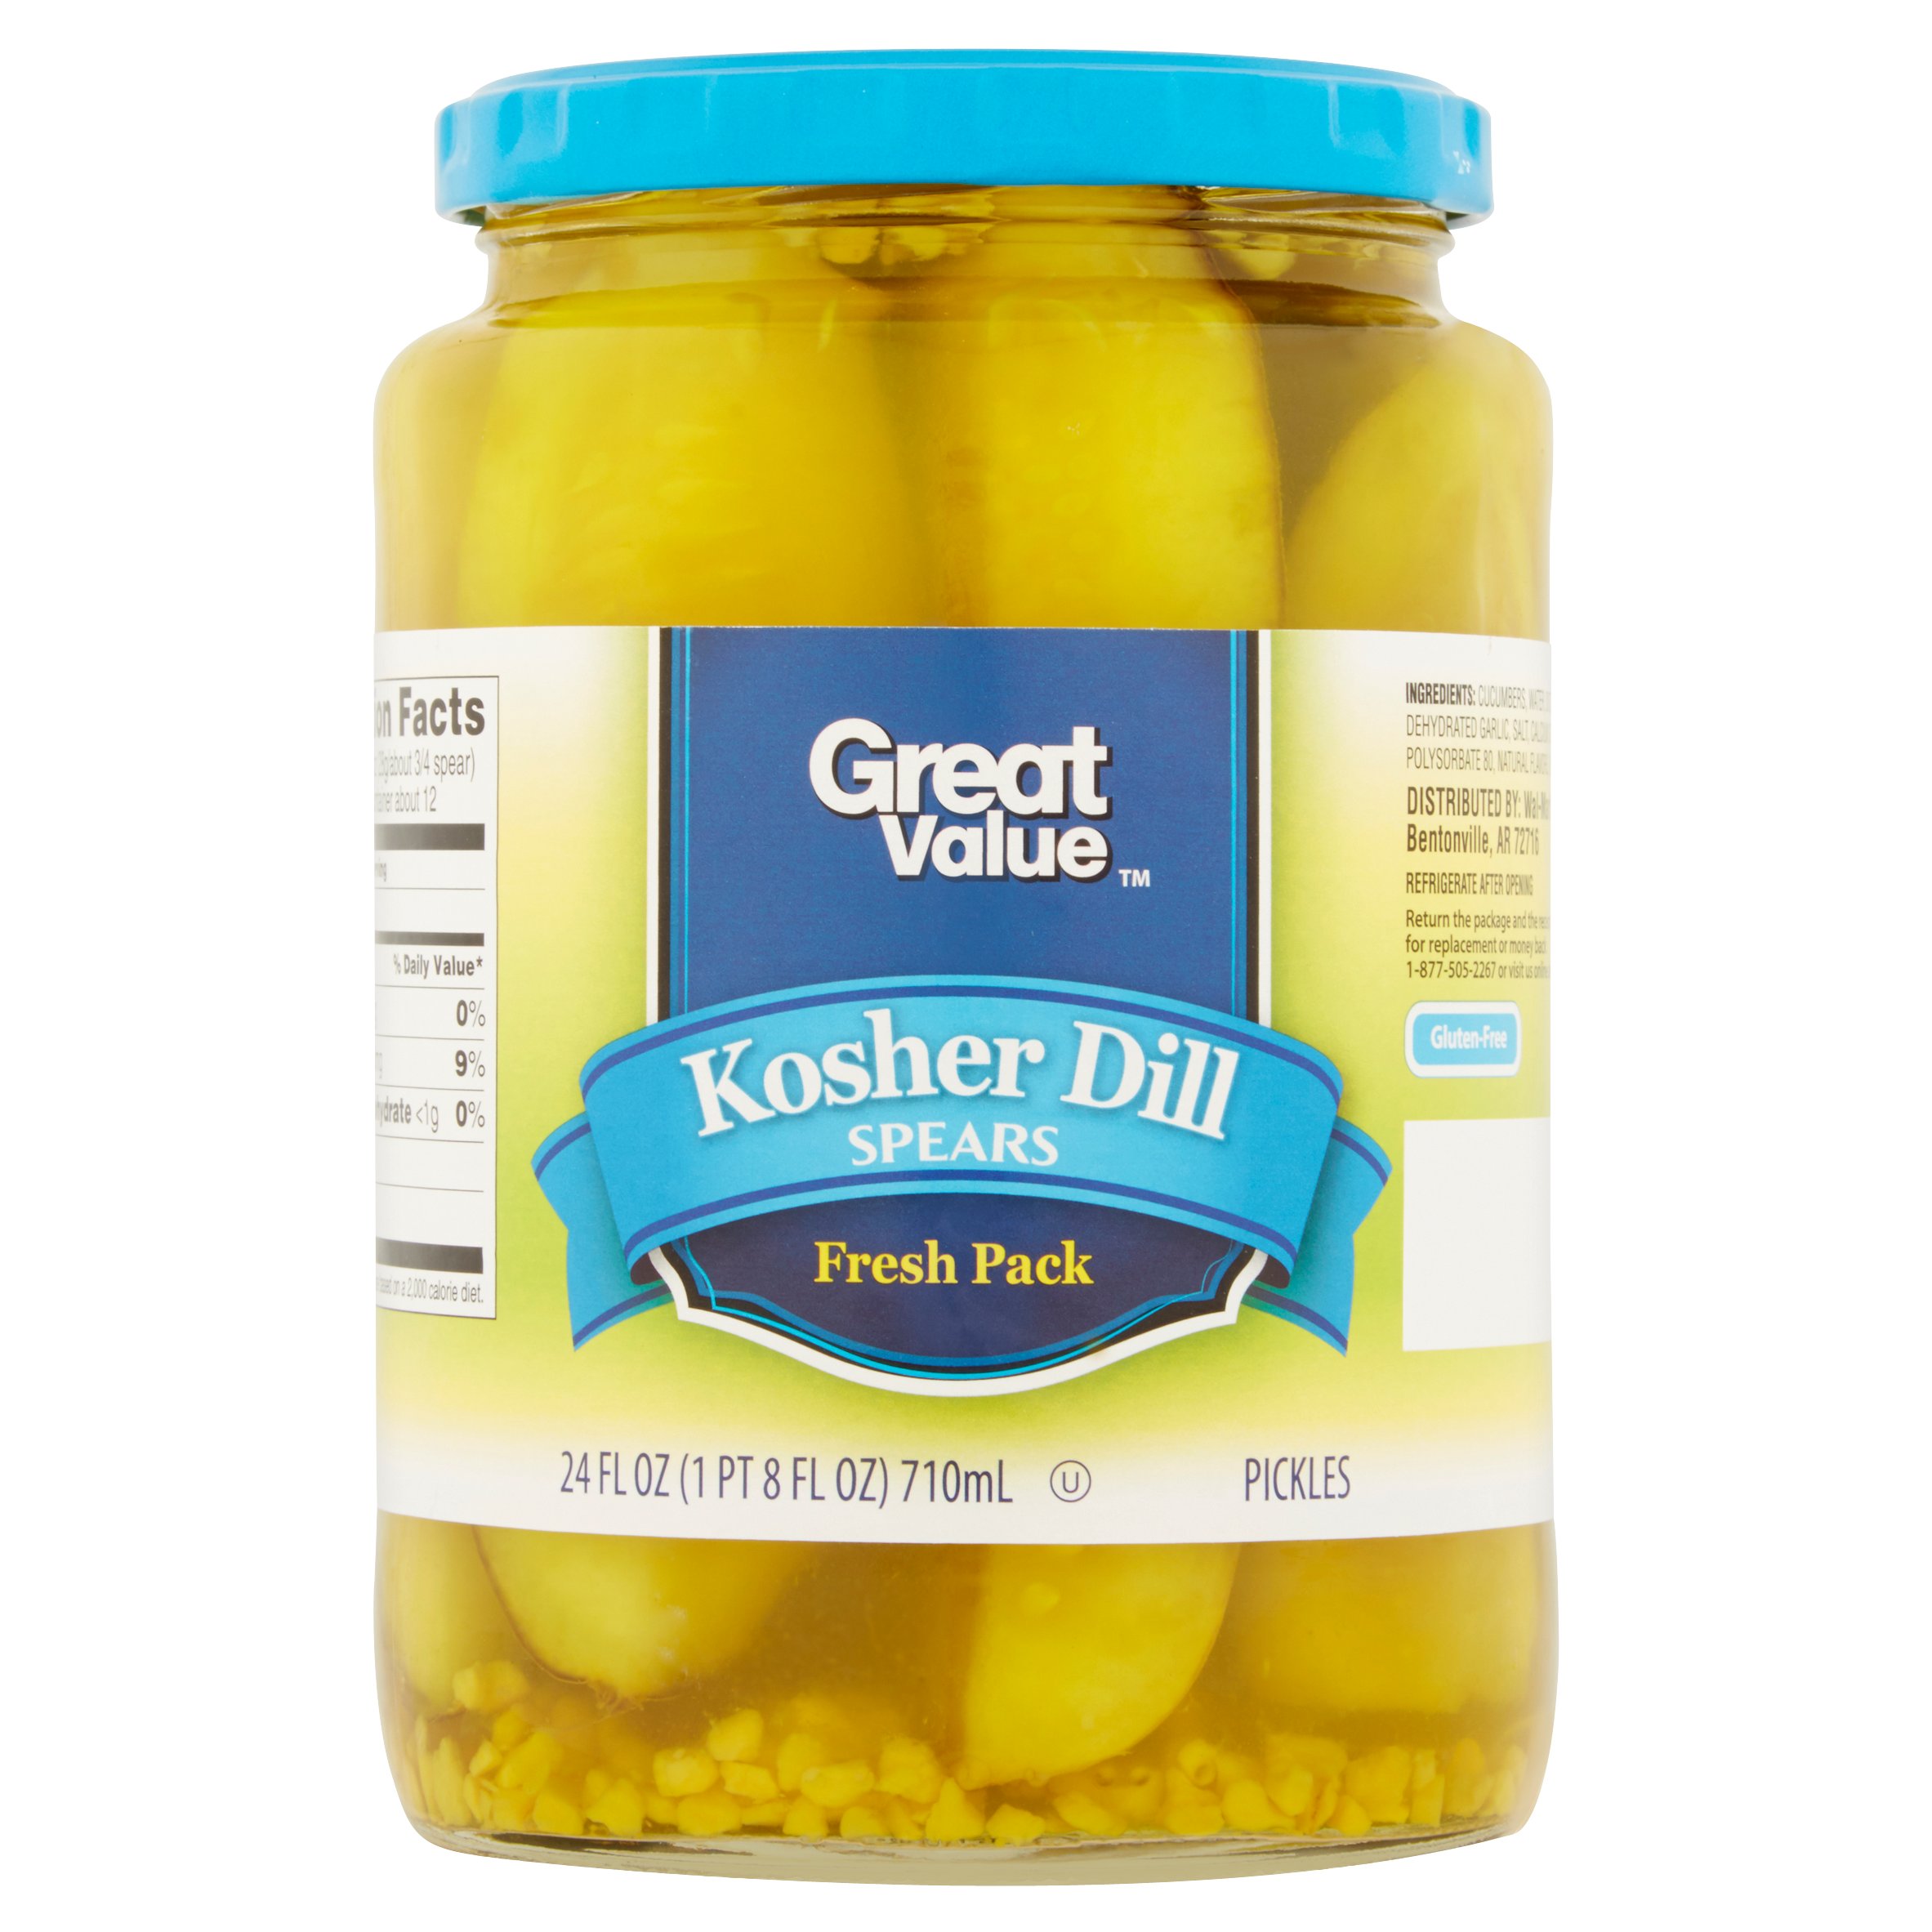 Great Value Kosher Dill Spears Pickles